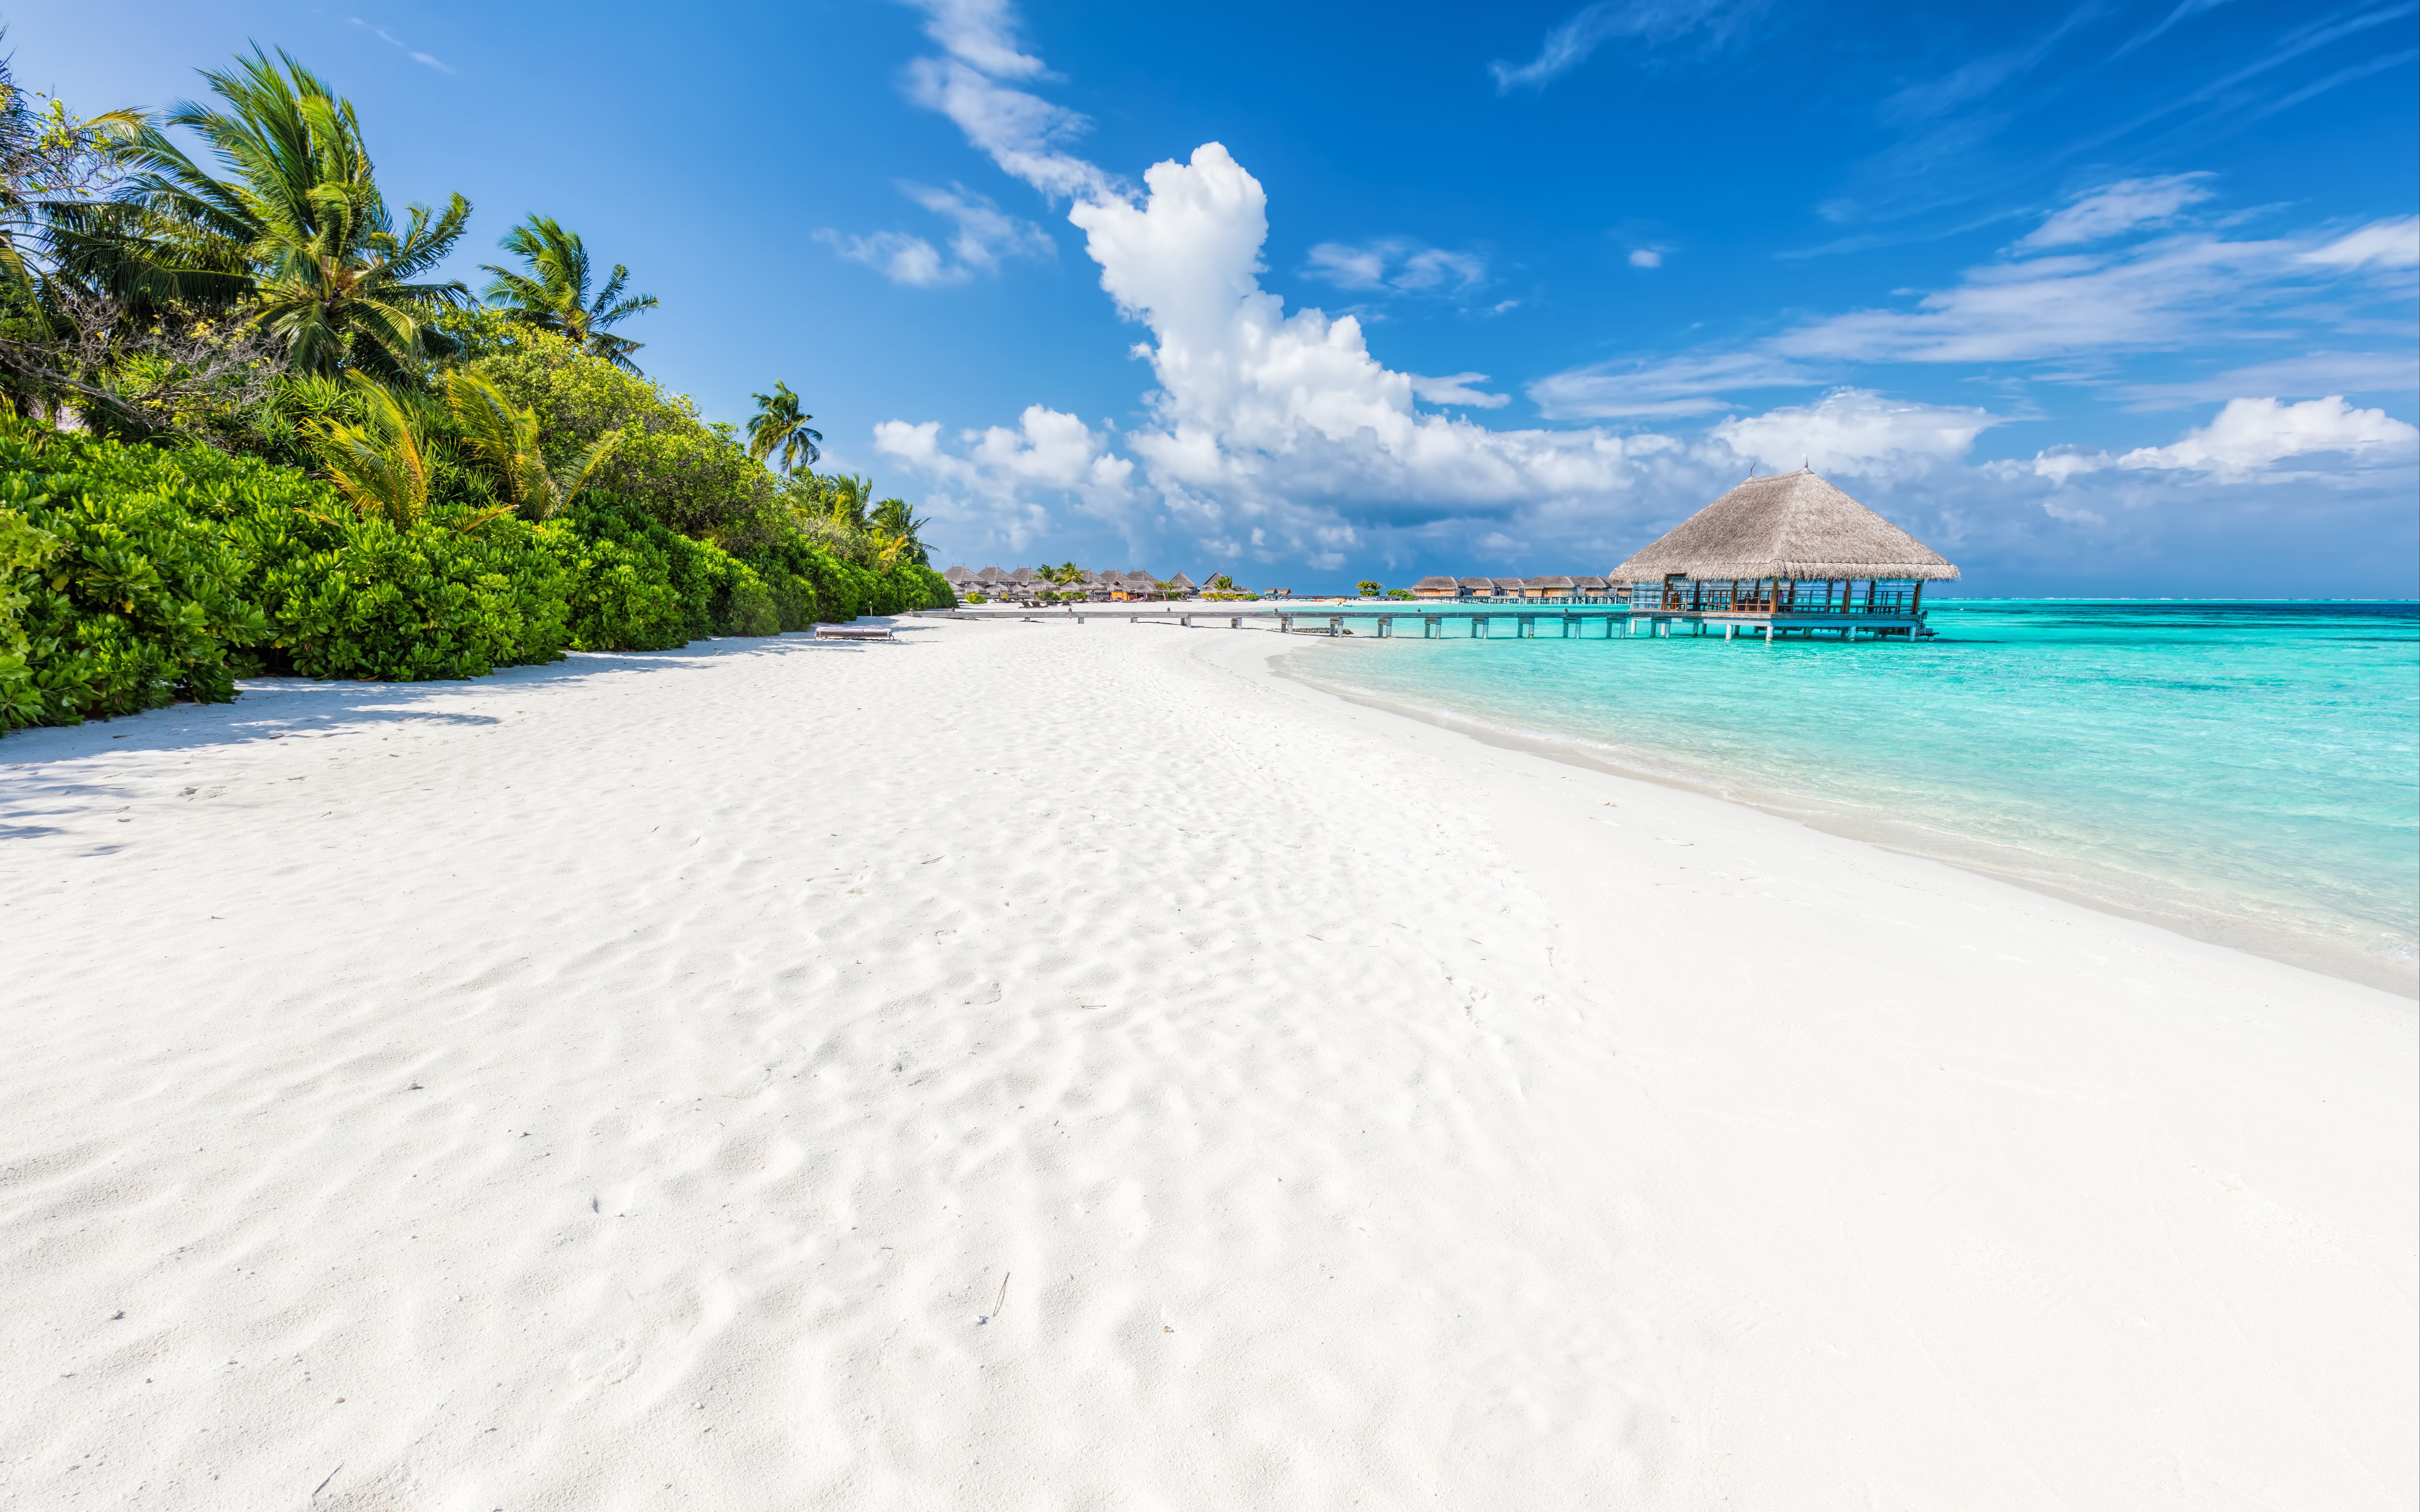 An image of a white sand beach in the Maldives